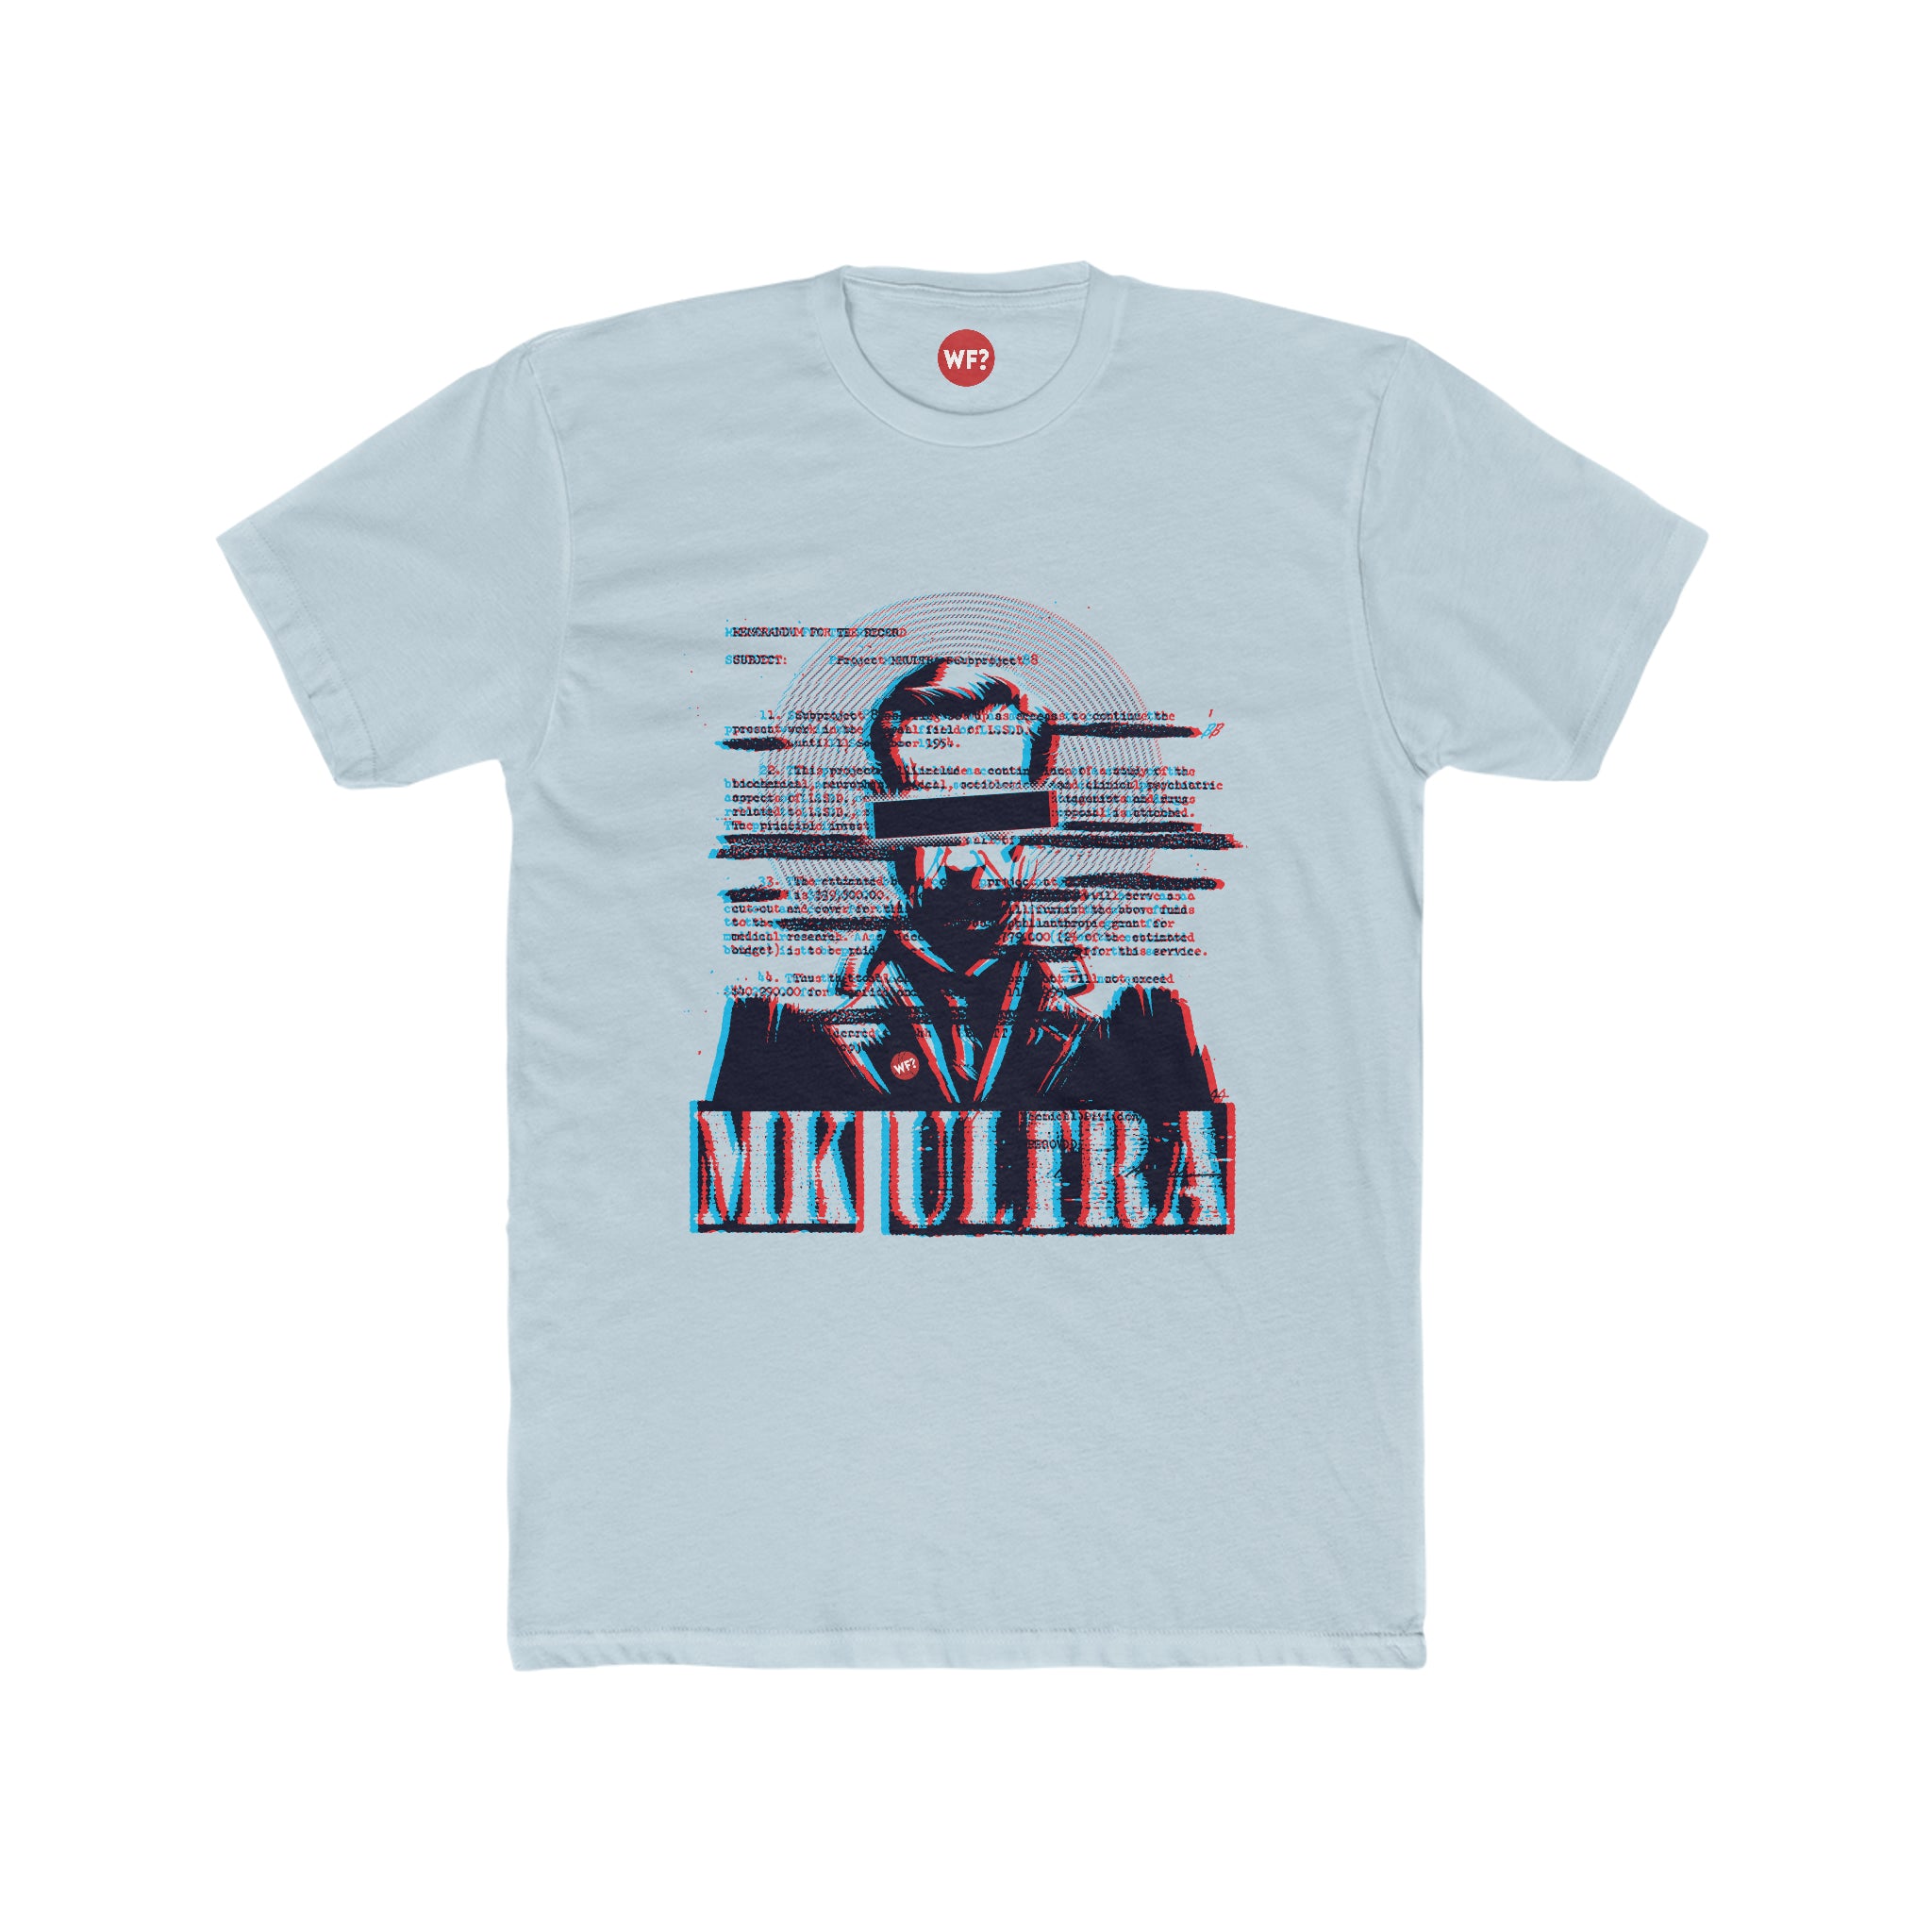 Buy solid-light-blue Project Podcast: MK Ultra Unisex Limited T-Shirt